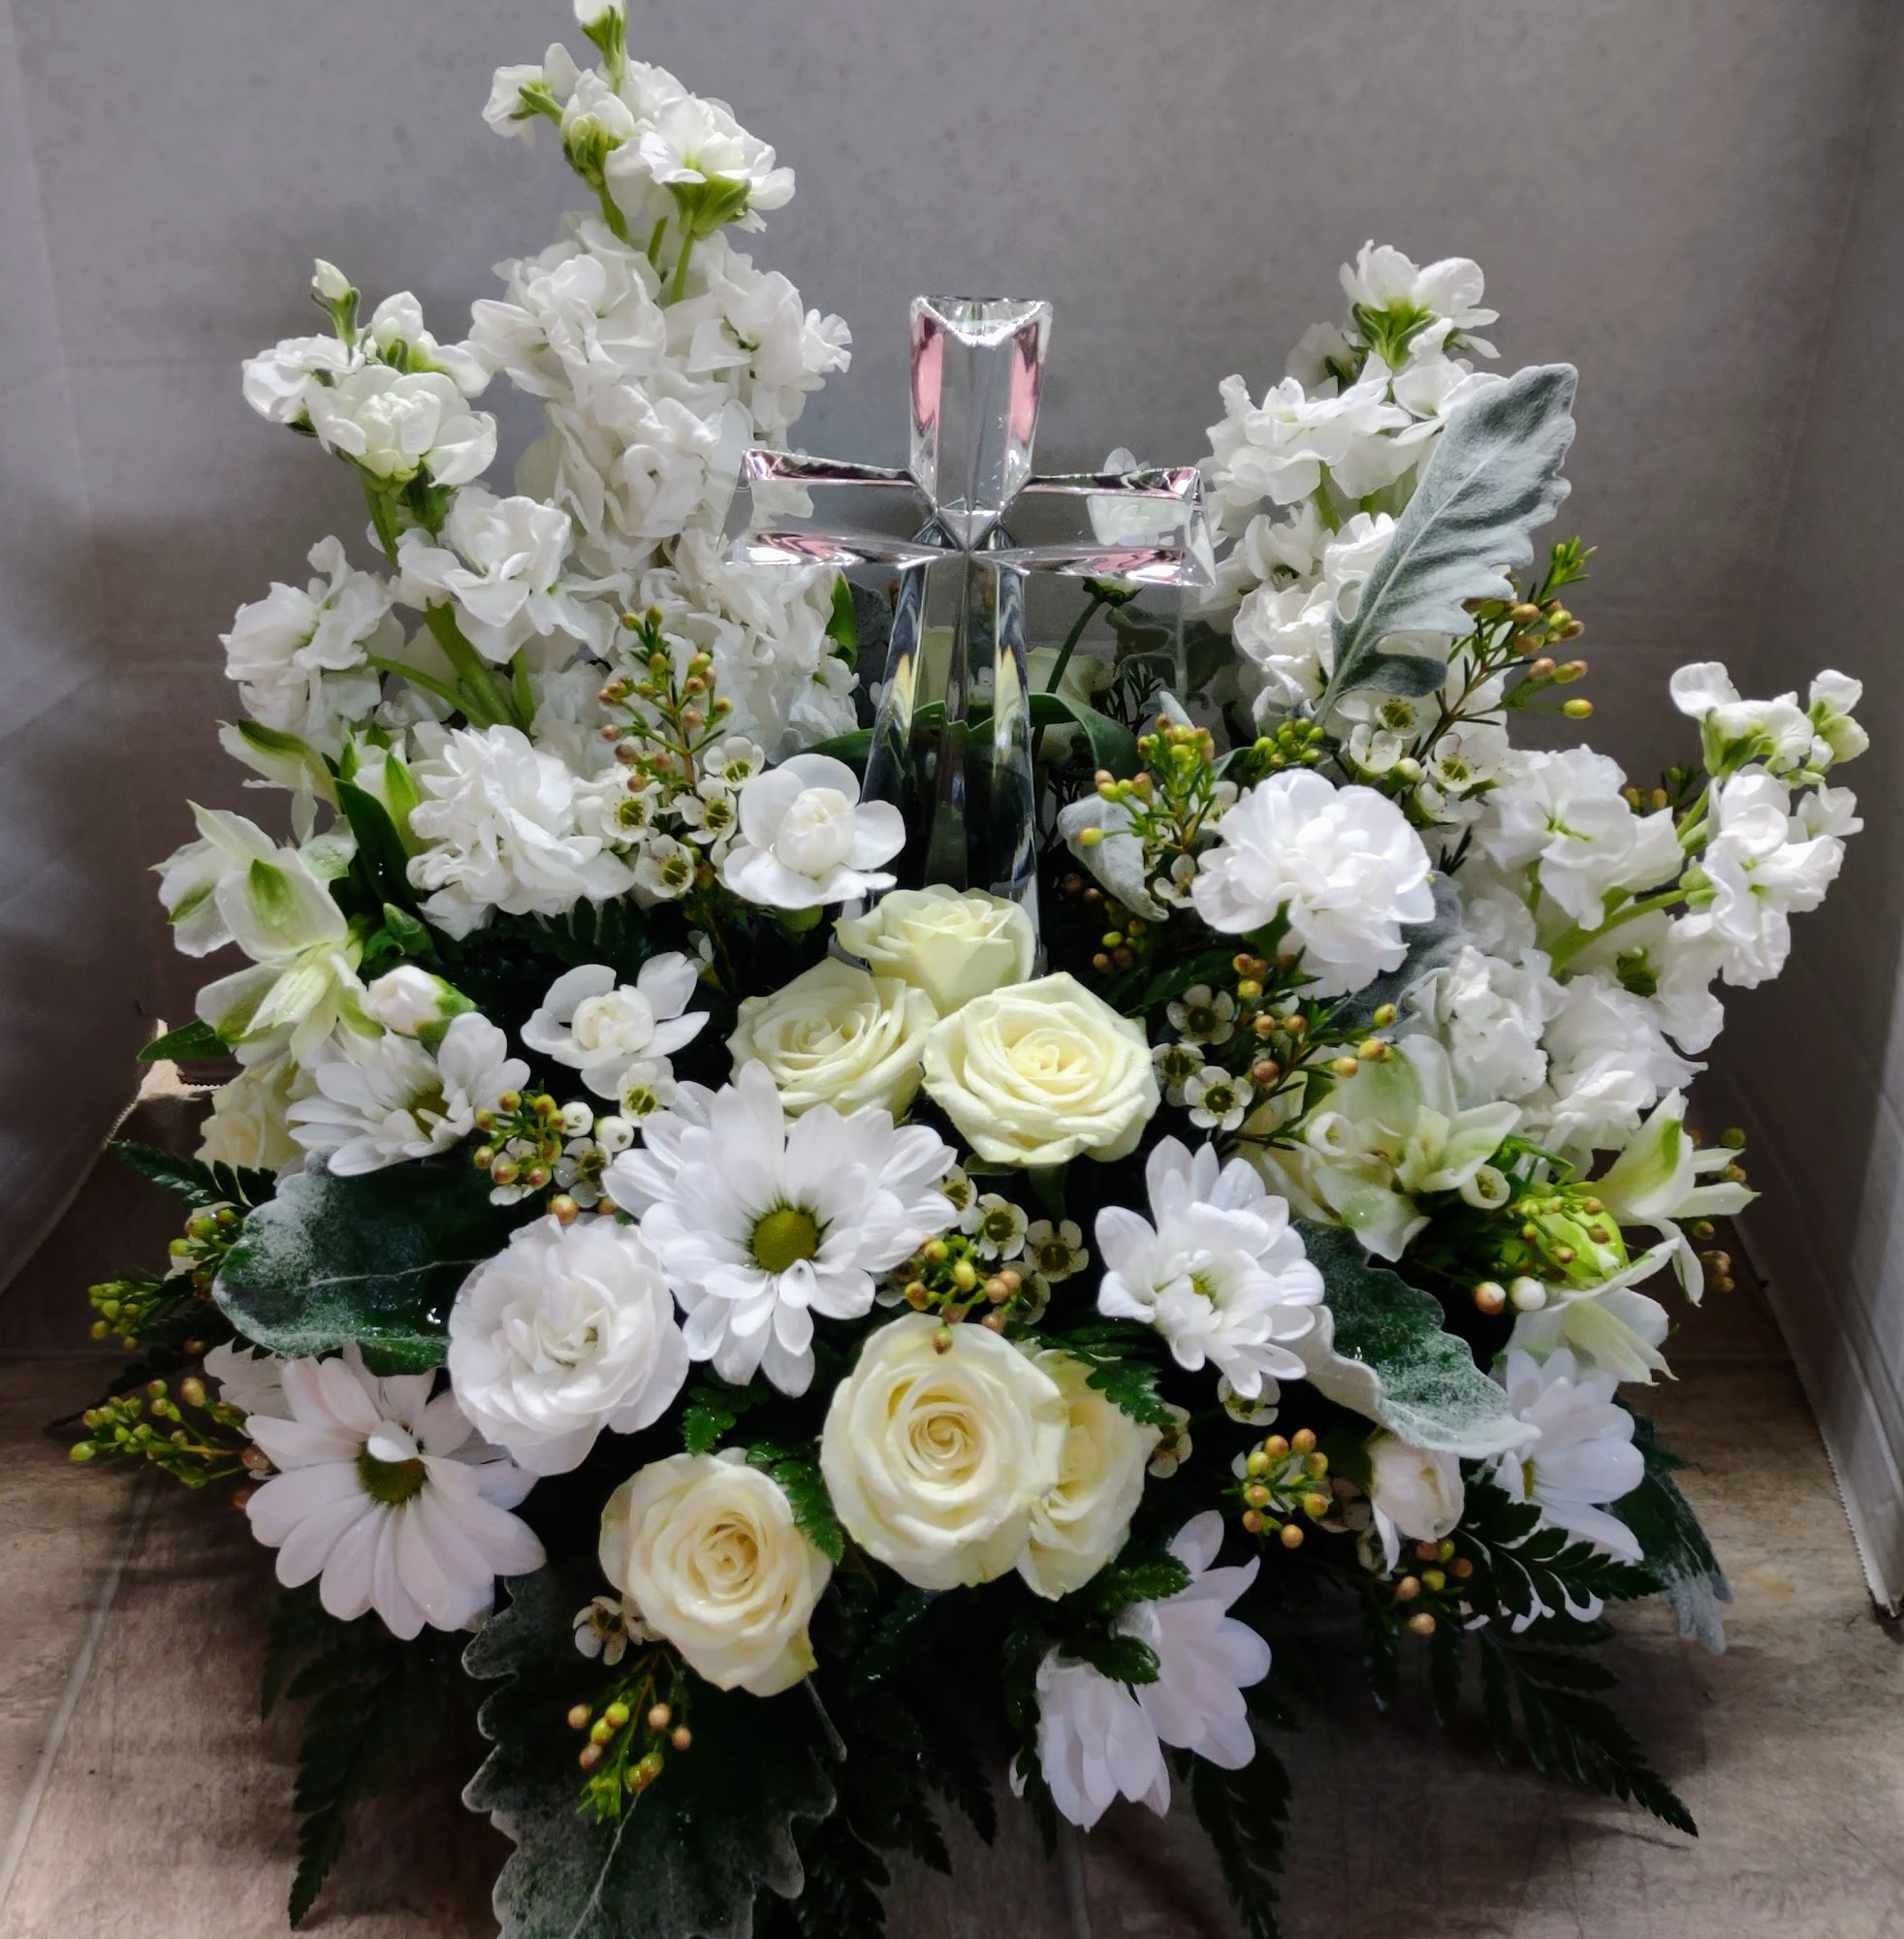 Allbaugh's Florist and Gifts